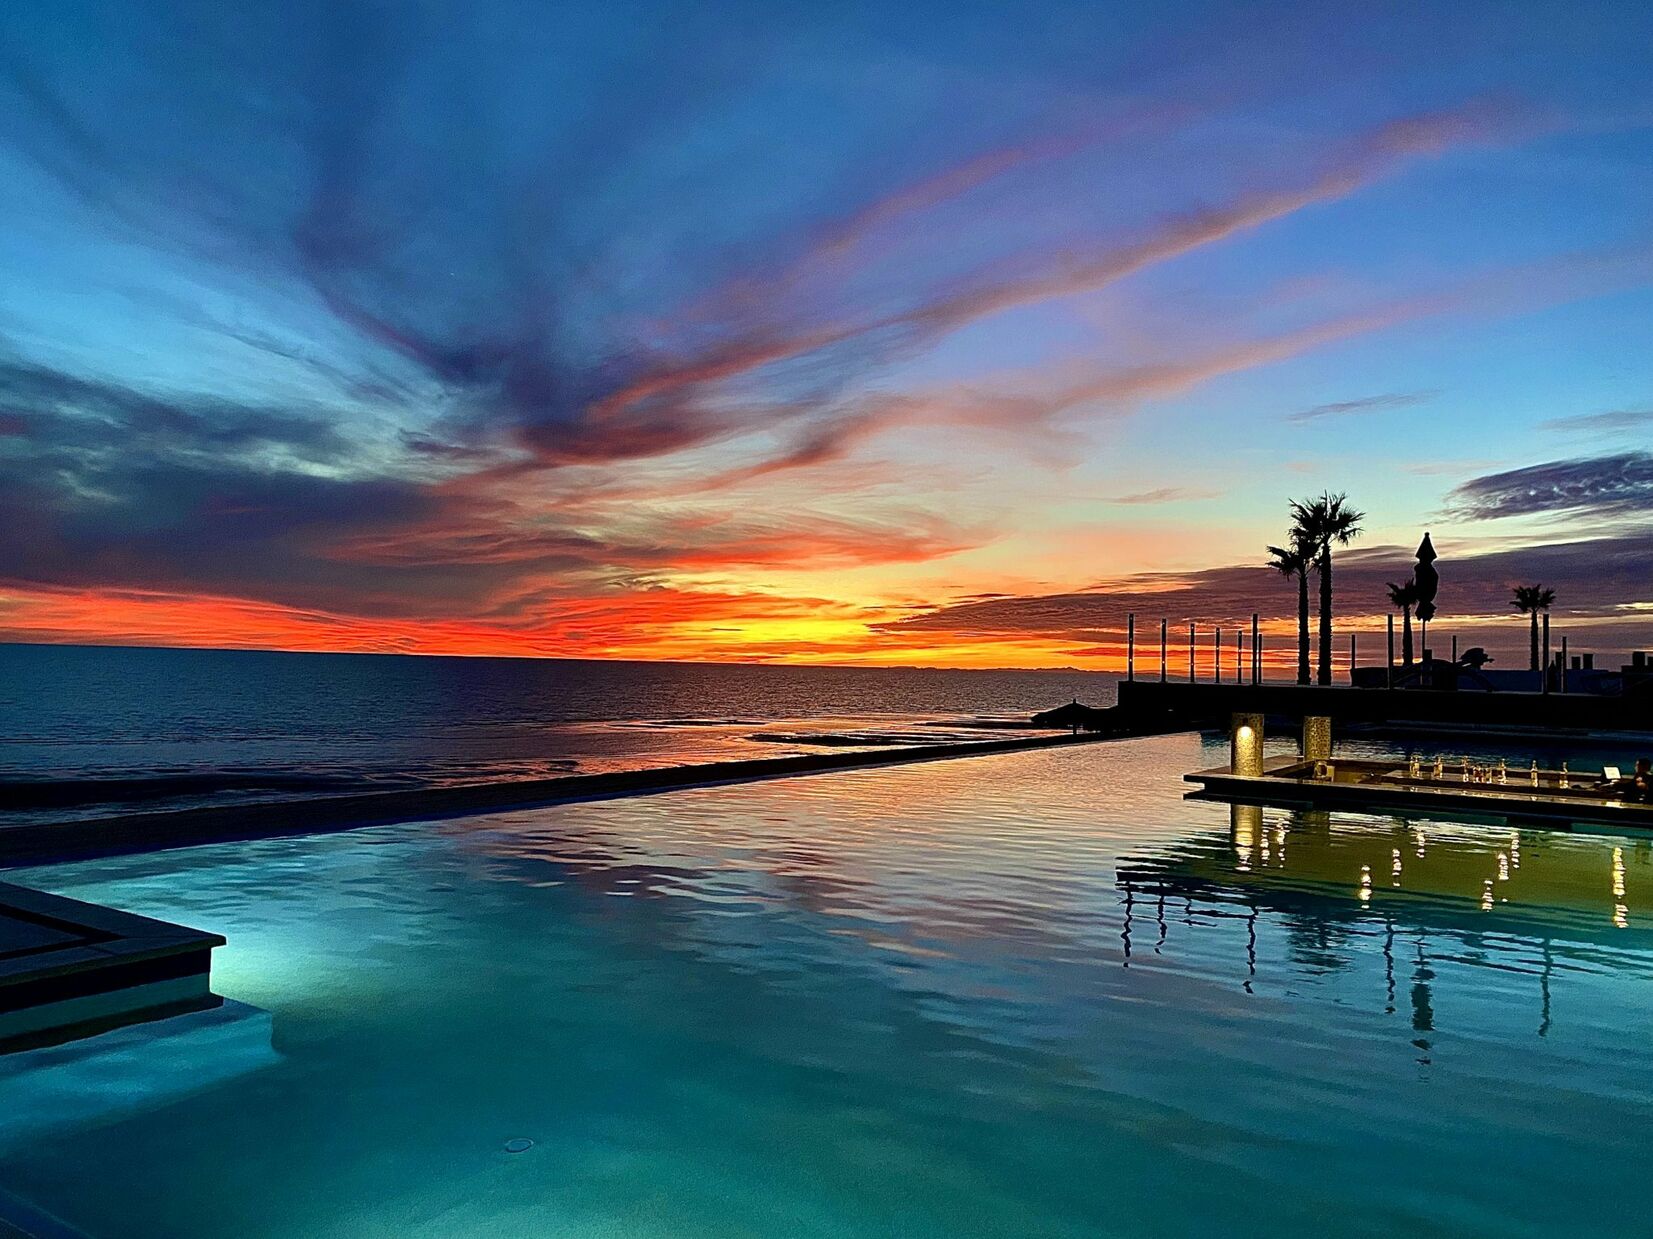 Sunset views from the main pool